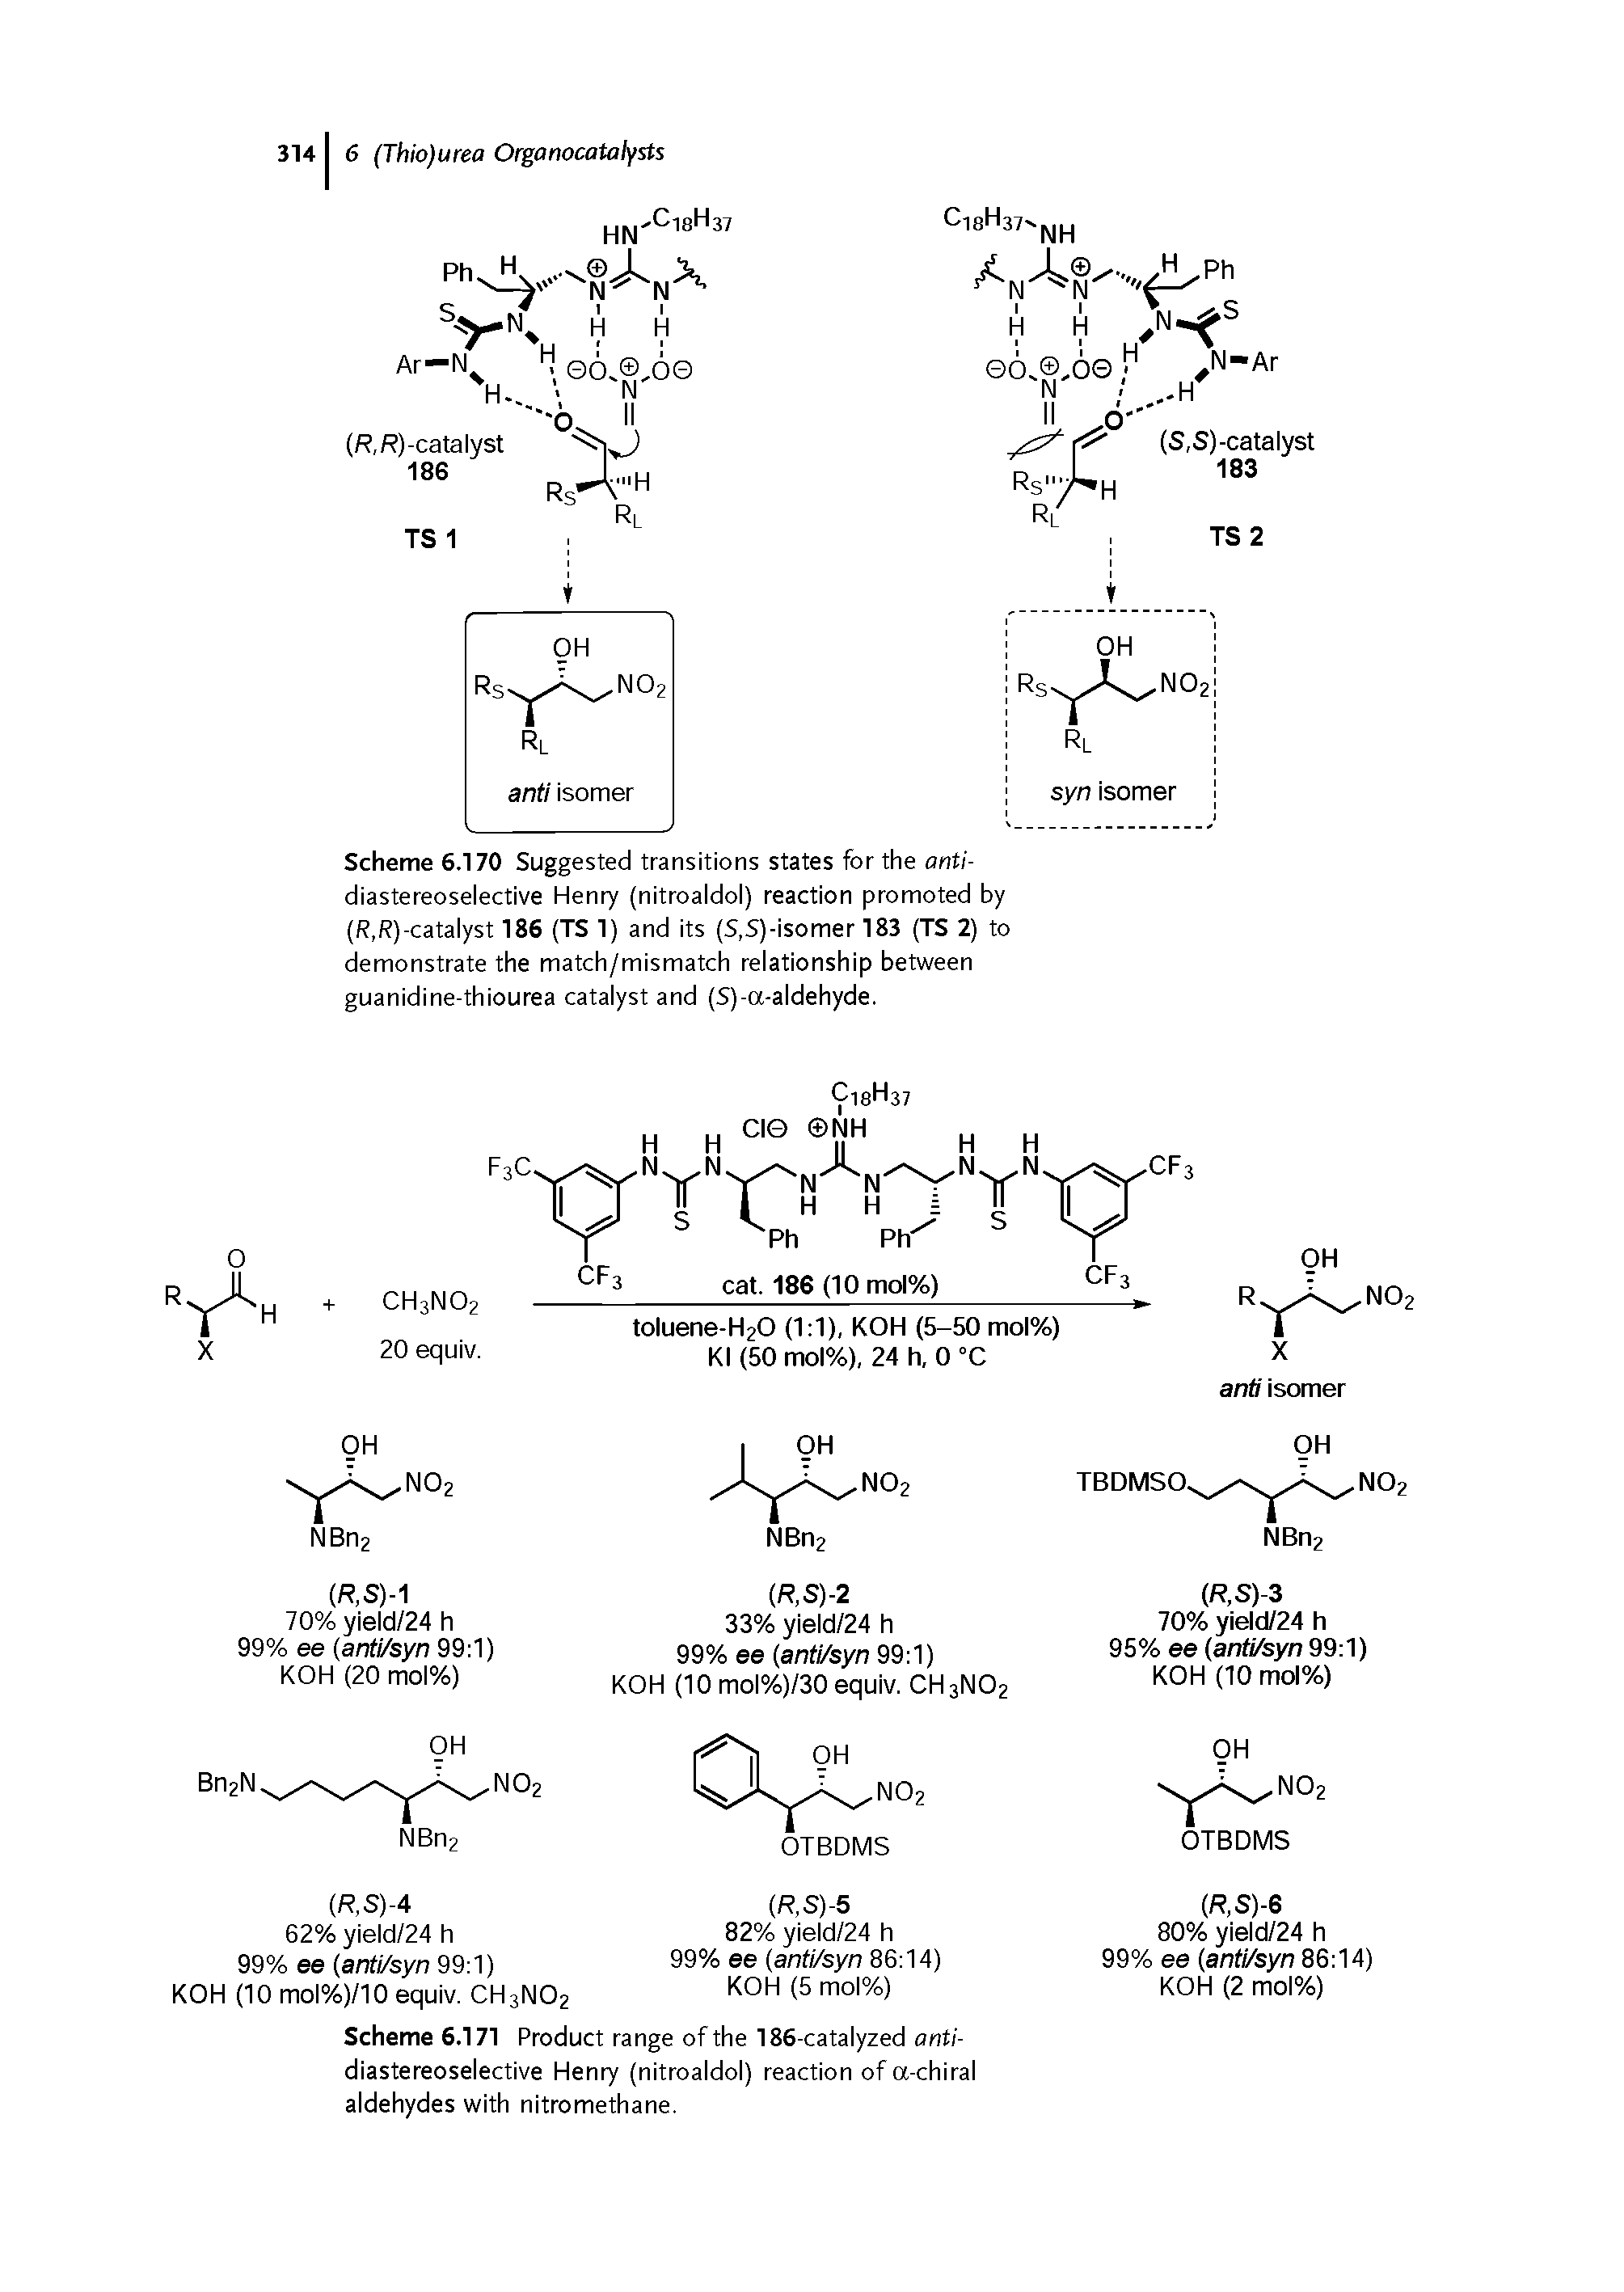 Scheme 6.171 Product range of the 186-catalyzed anti-diastereoselective Henry (nitroaldol) reaction of a-chiral aldehydes with nitromethane.